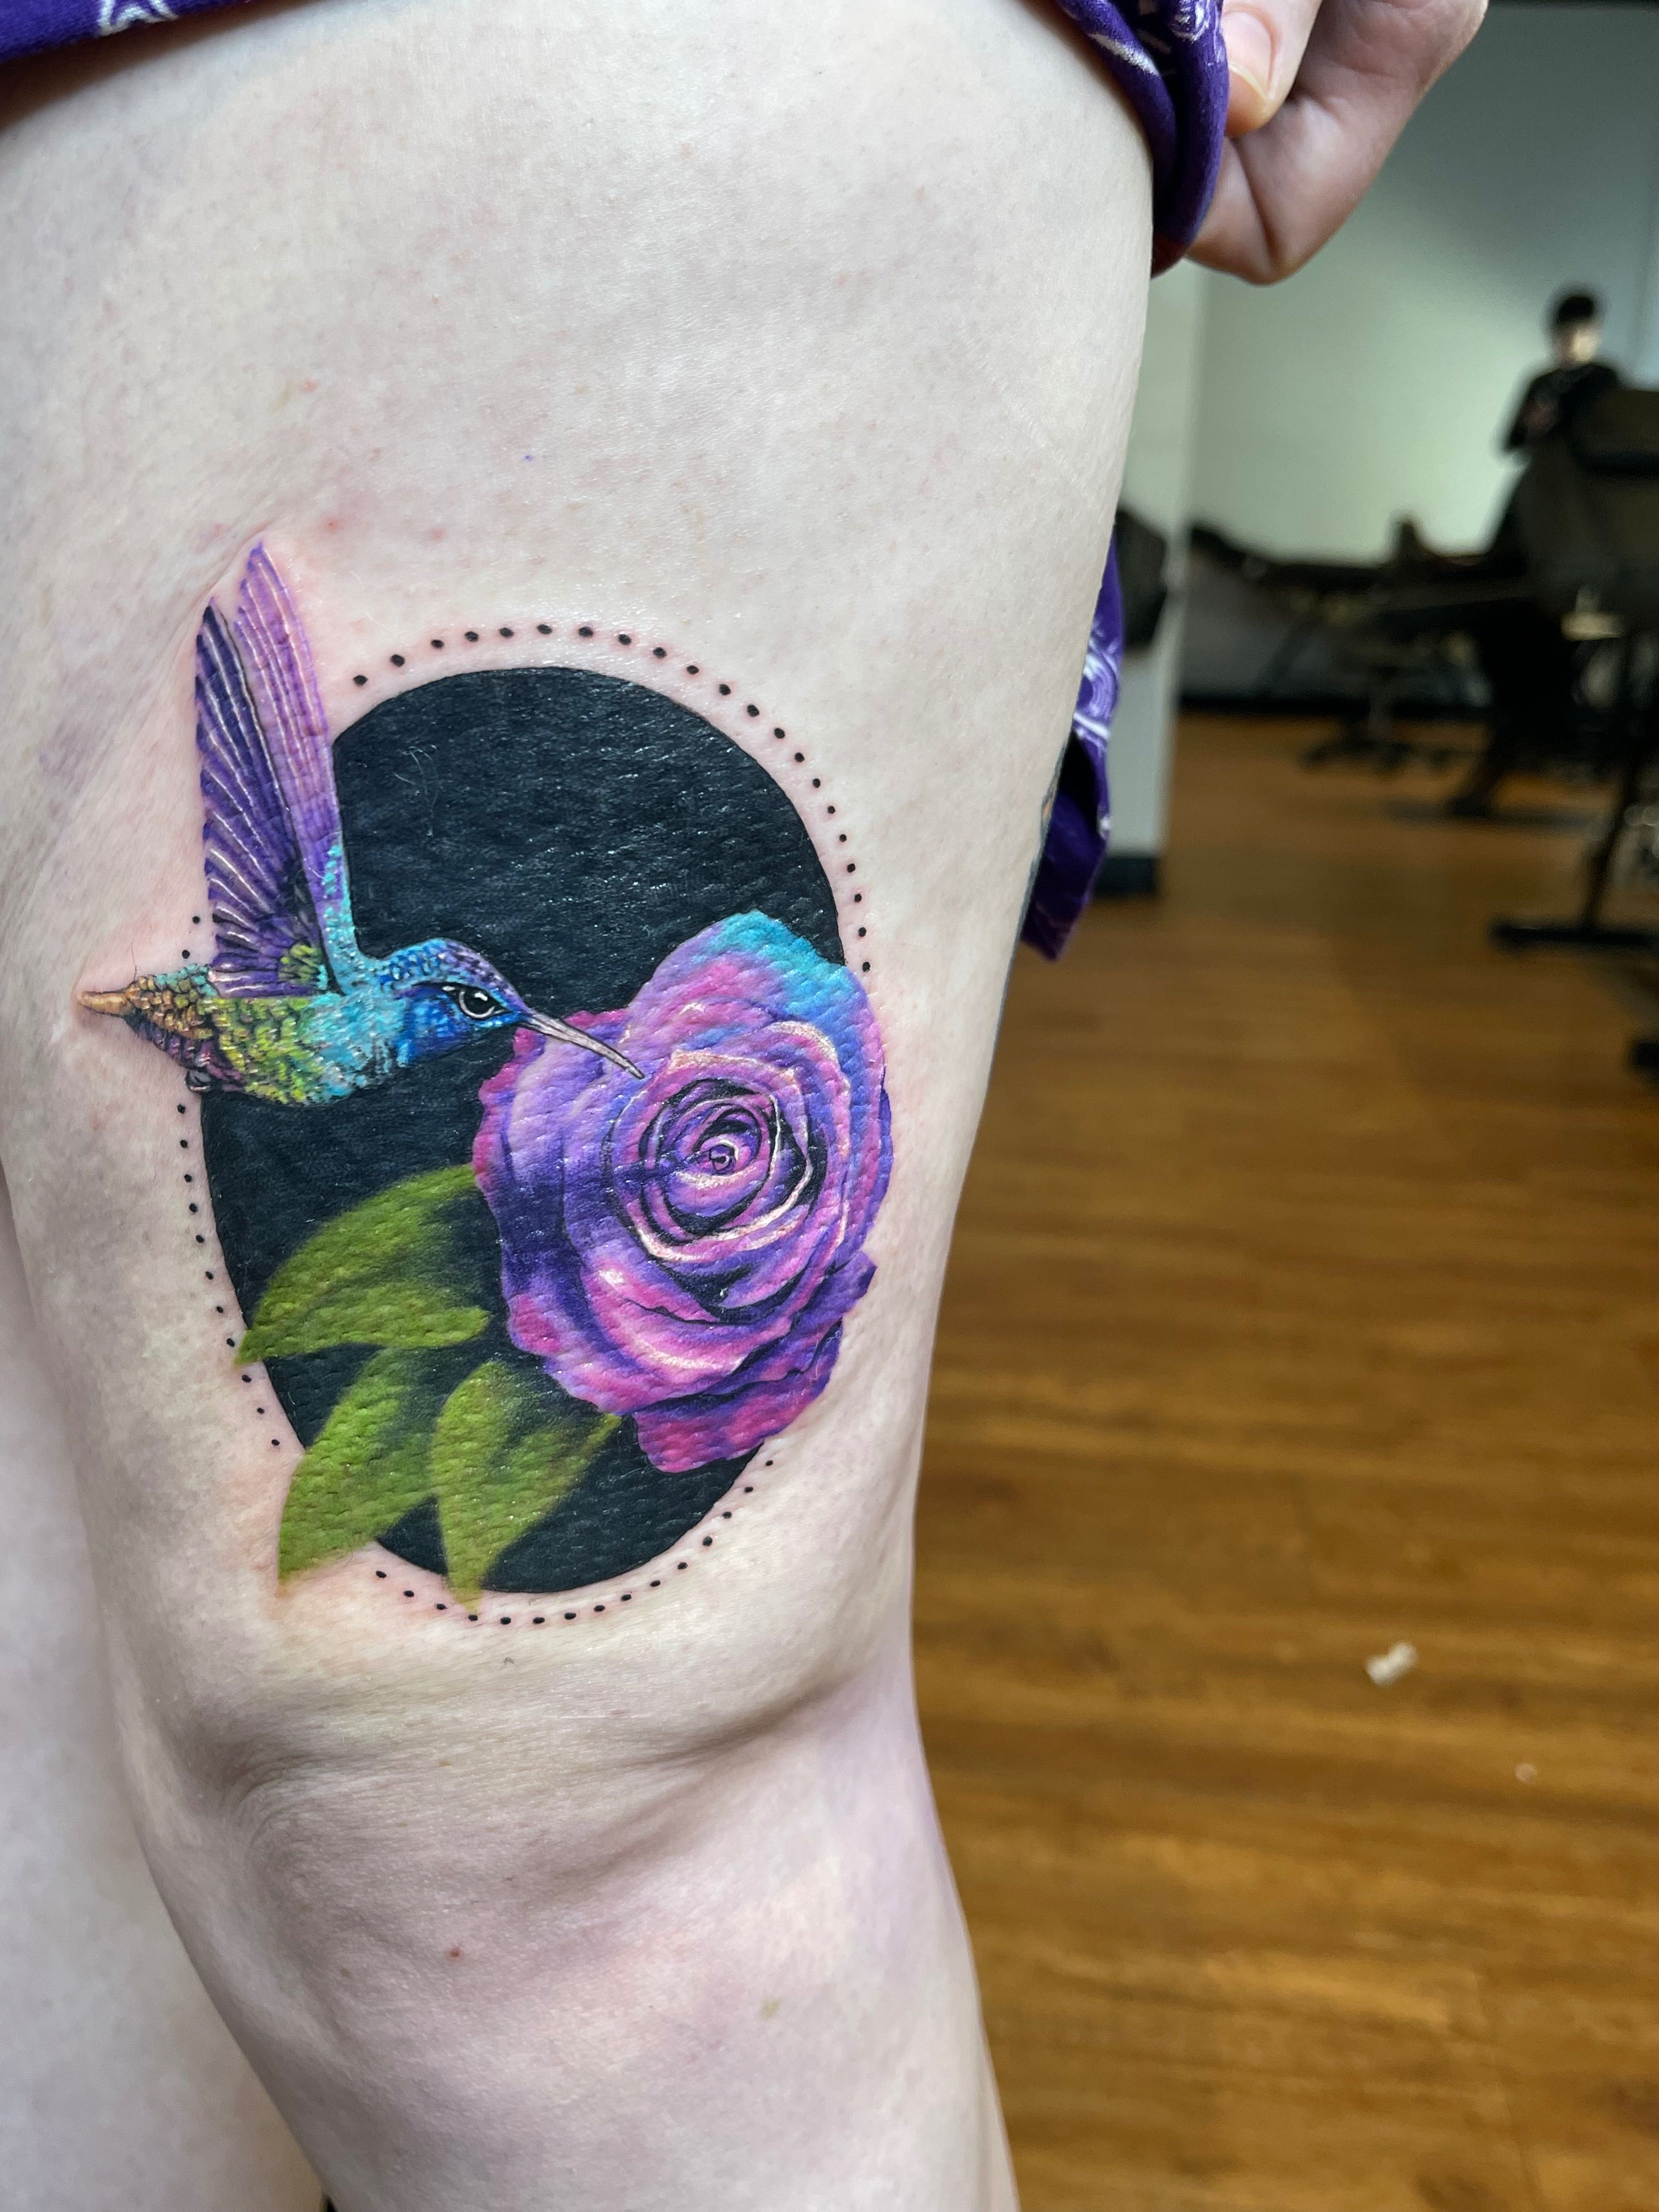 Mockingbird Tattoo Company - Really fun Rose and hummingbird tattoo from  the Tampa tattoo convention last weekend. Booking appointments for November  and December at Ink@mockingbirdtattoo.com or call the shop at 941 953-1873.  |